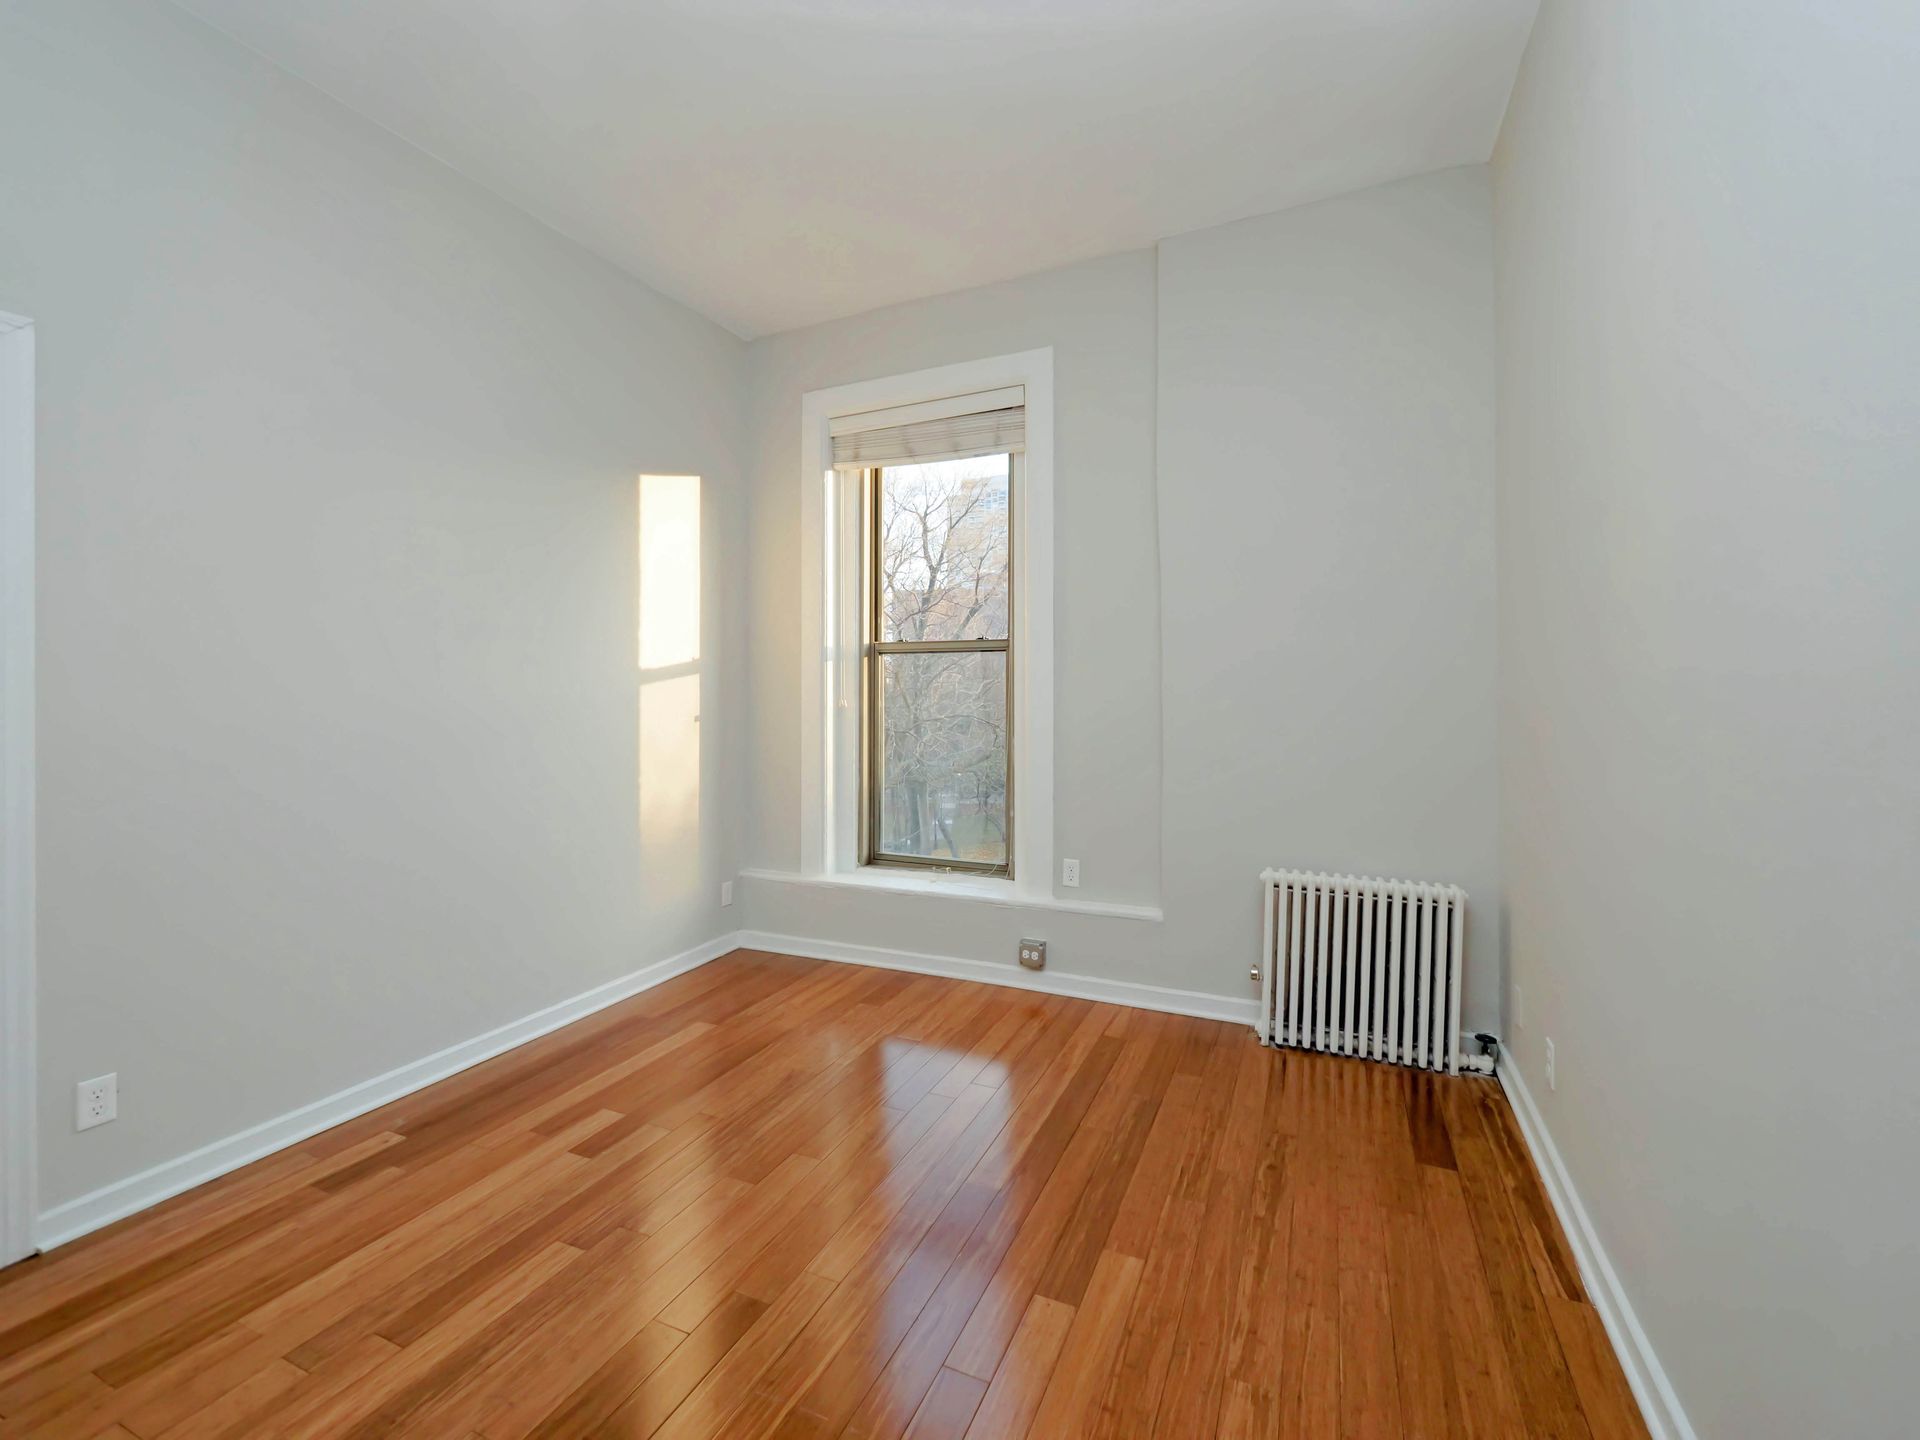 An empty room with hardwood floors and a window at Reside on Clark.